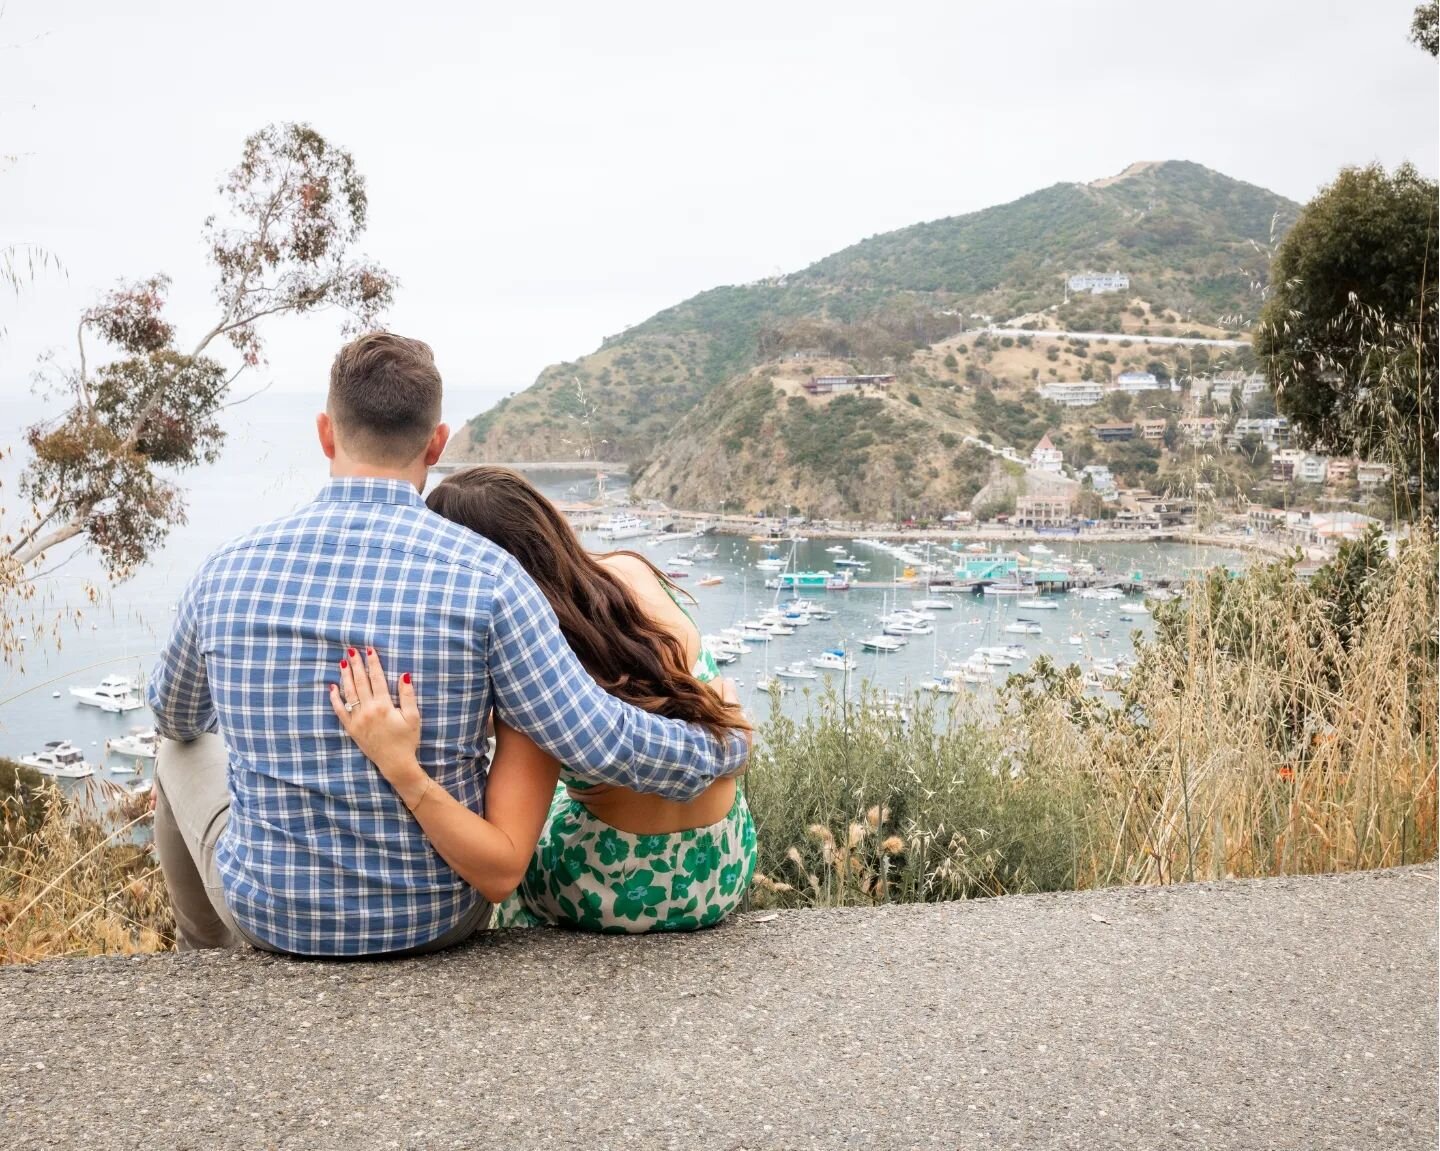 Love in Catalina ❤️💍🌴📸

Congratulations to Jackie and Corey on their recent Engagement in Catalina. 

If you're looking for photos in Catalina, check out fickephotography.com/catalina to learn more 📸

Stuff for the algorithm: 

#catalina
#catalin